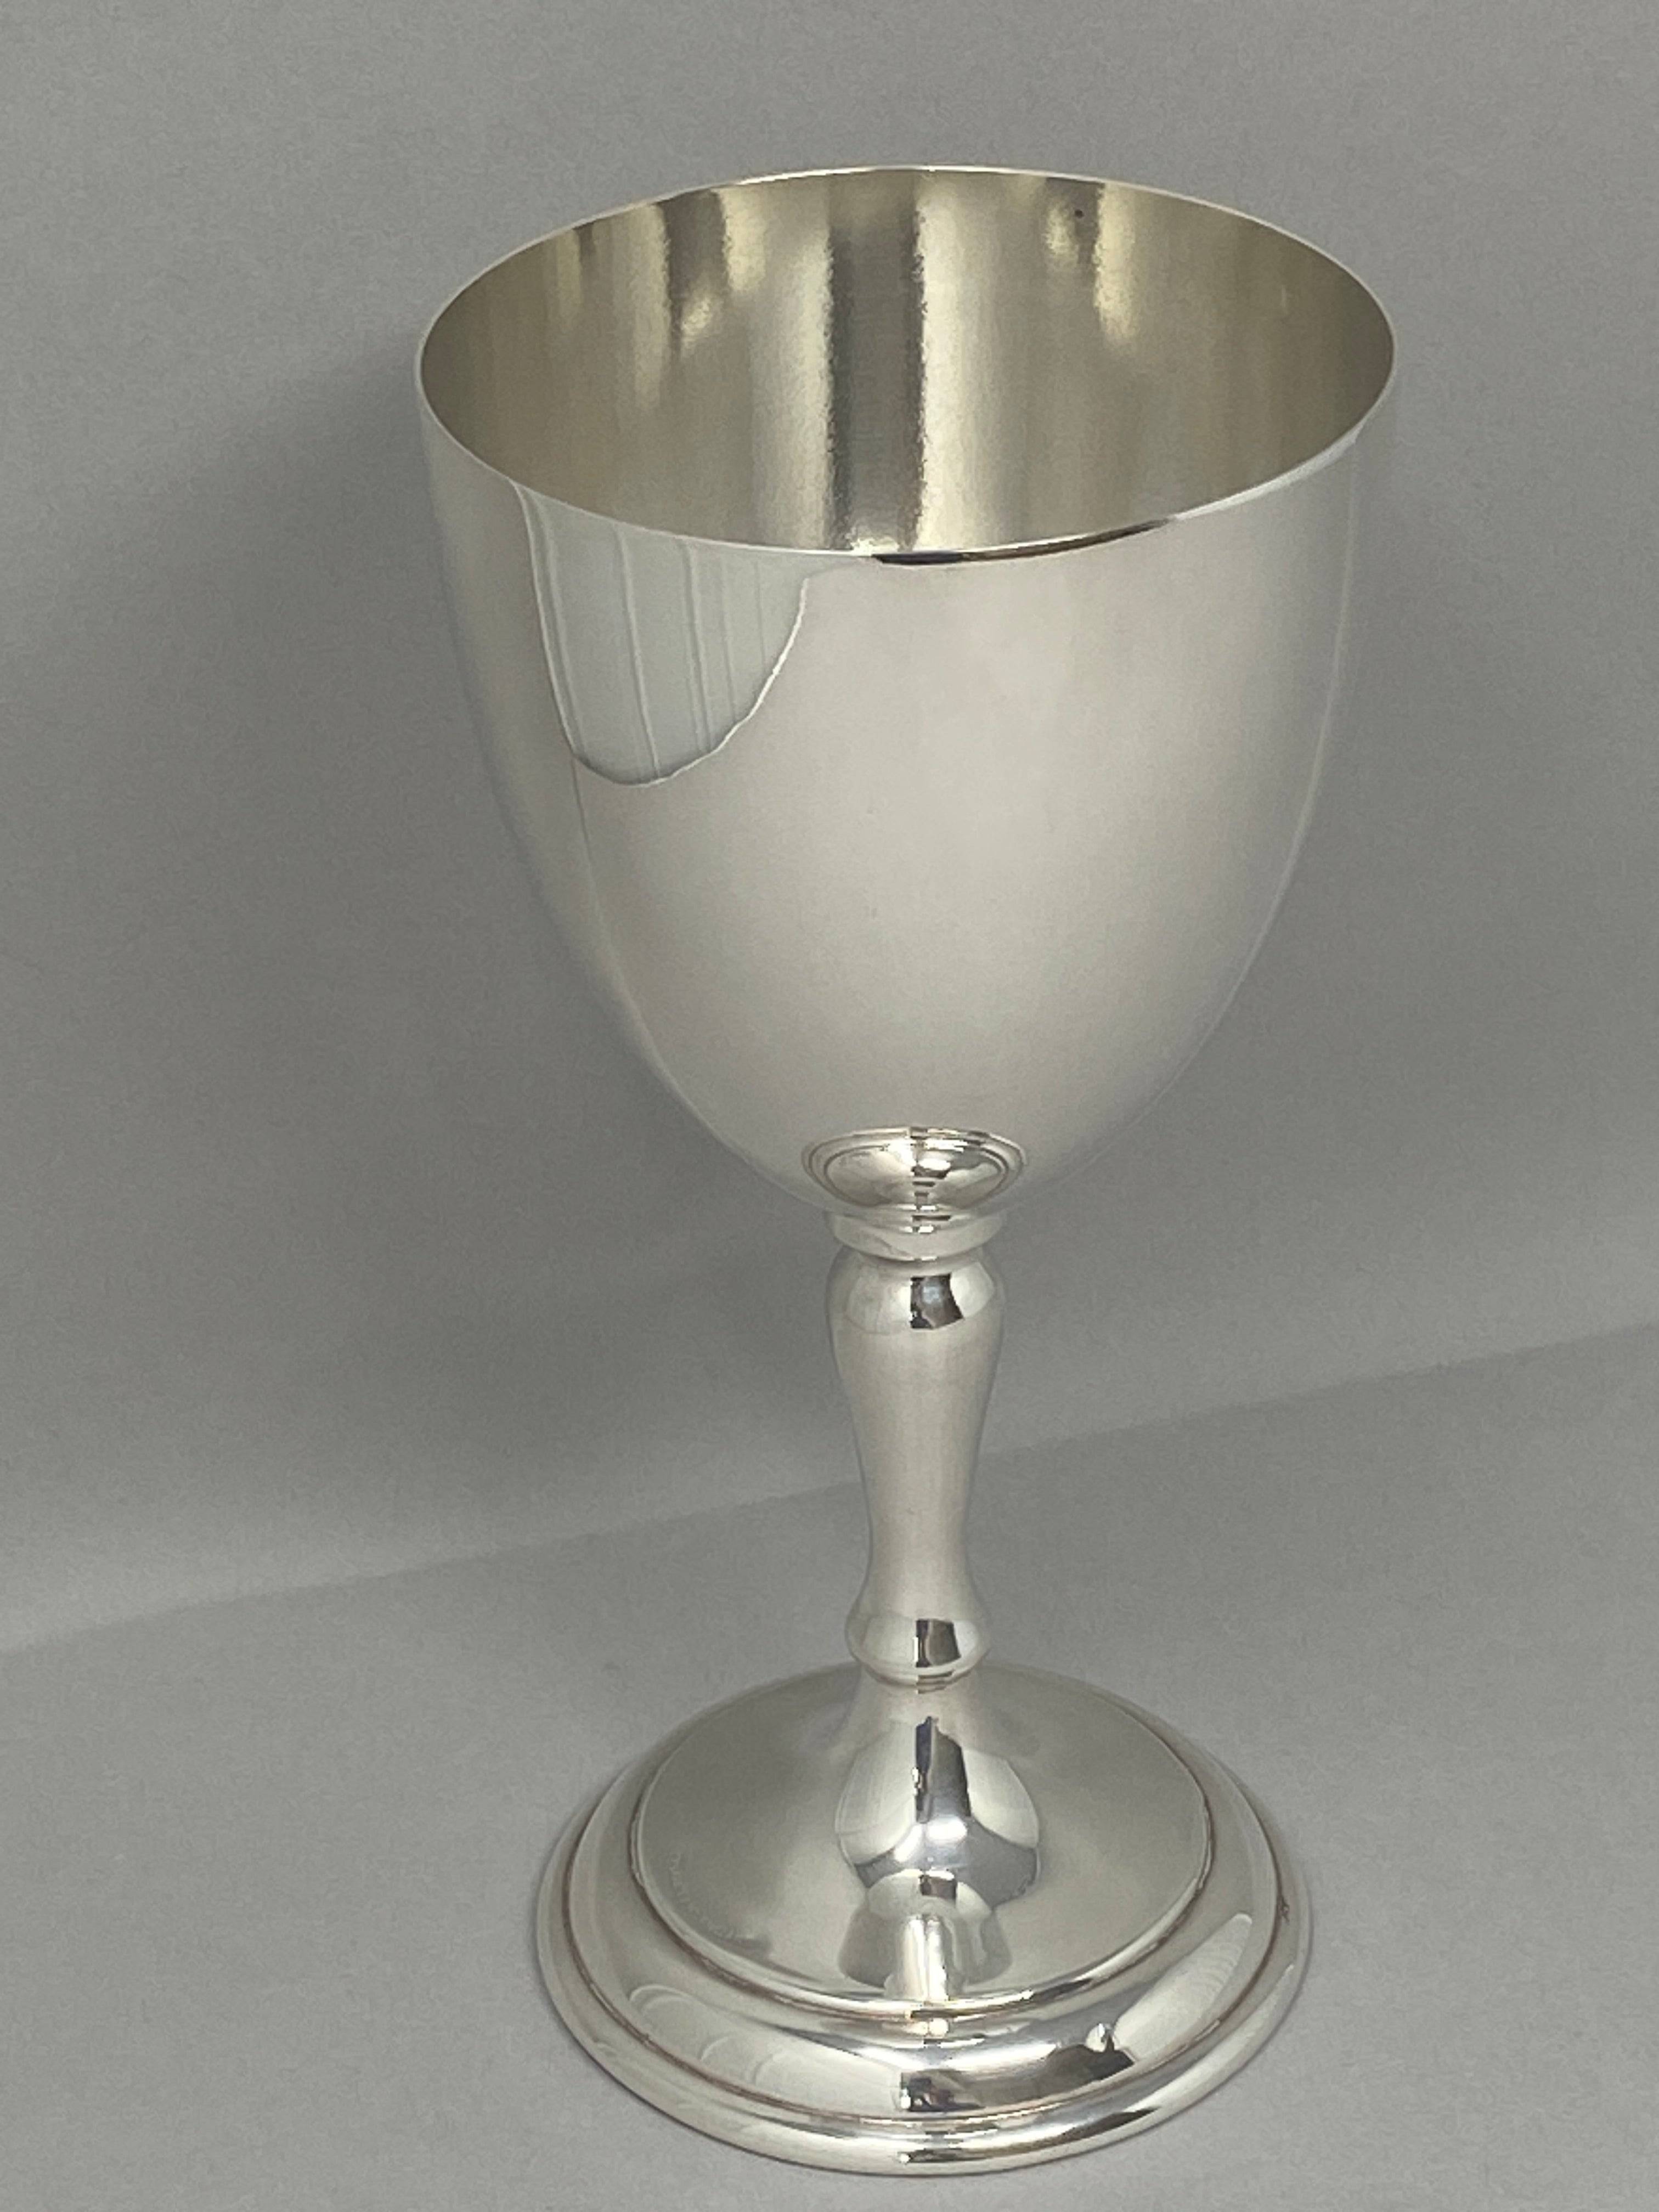 Antique Silver Plated Large Goblet